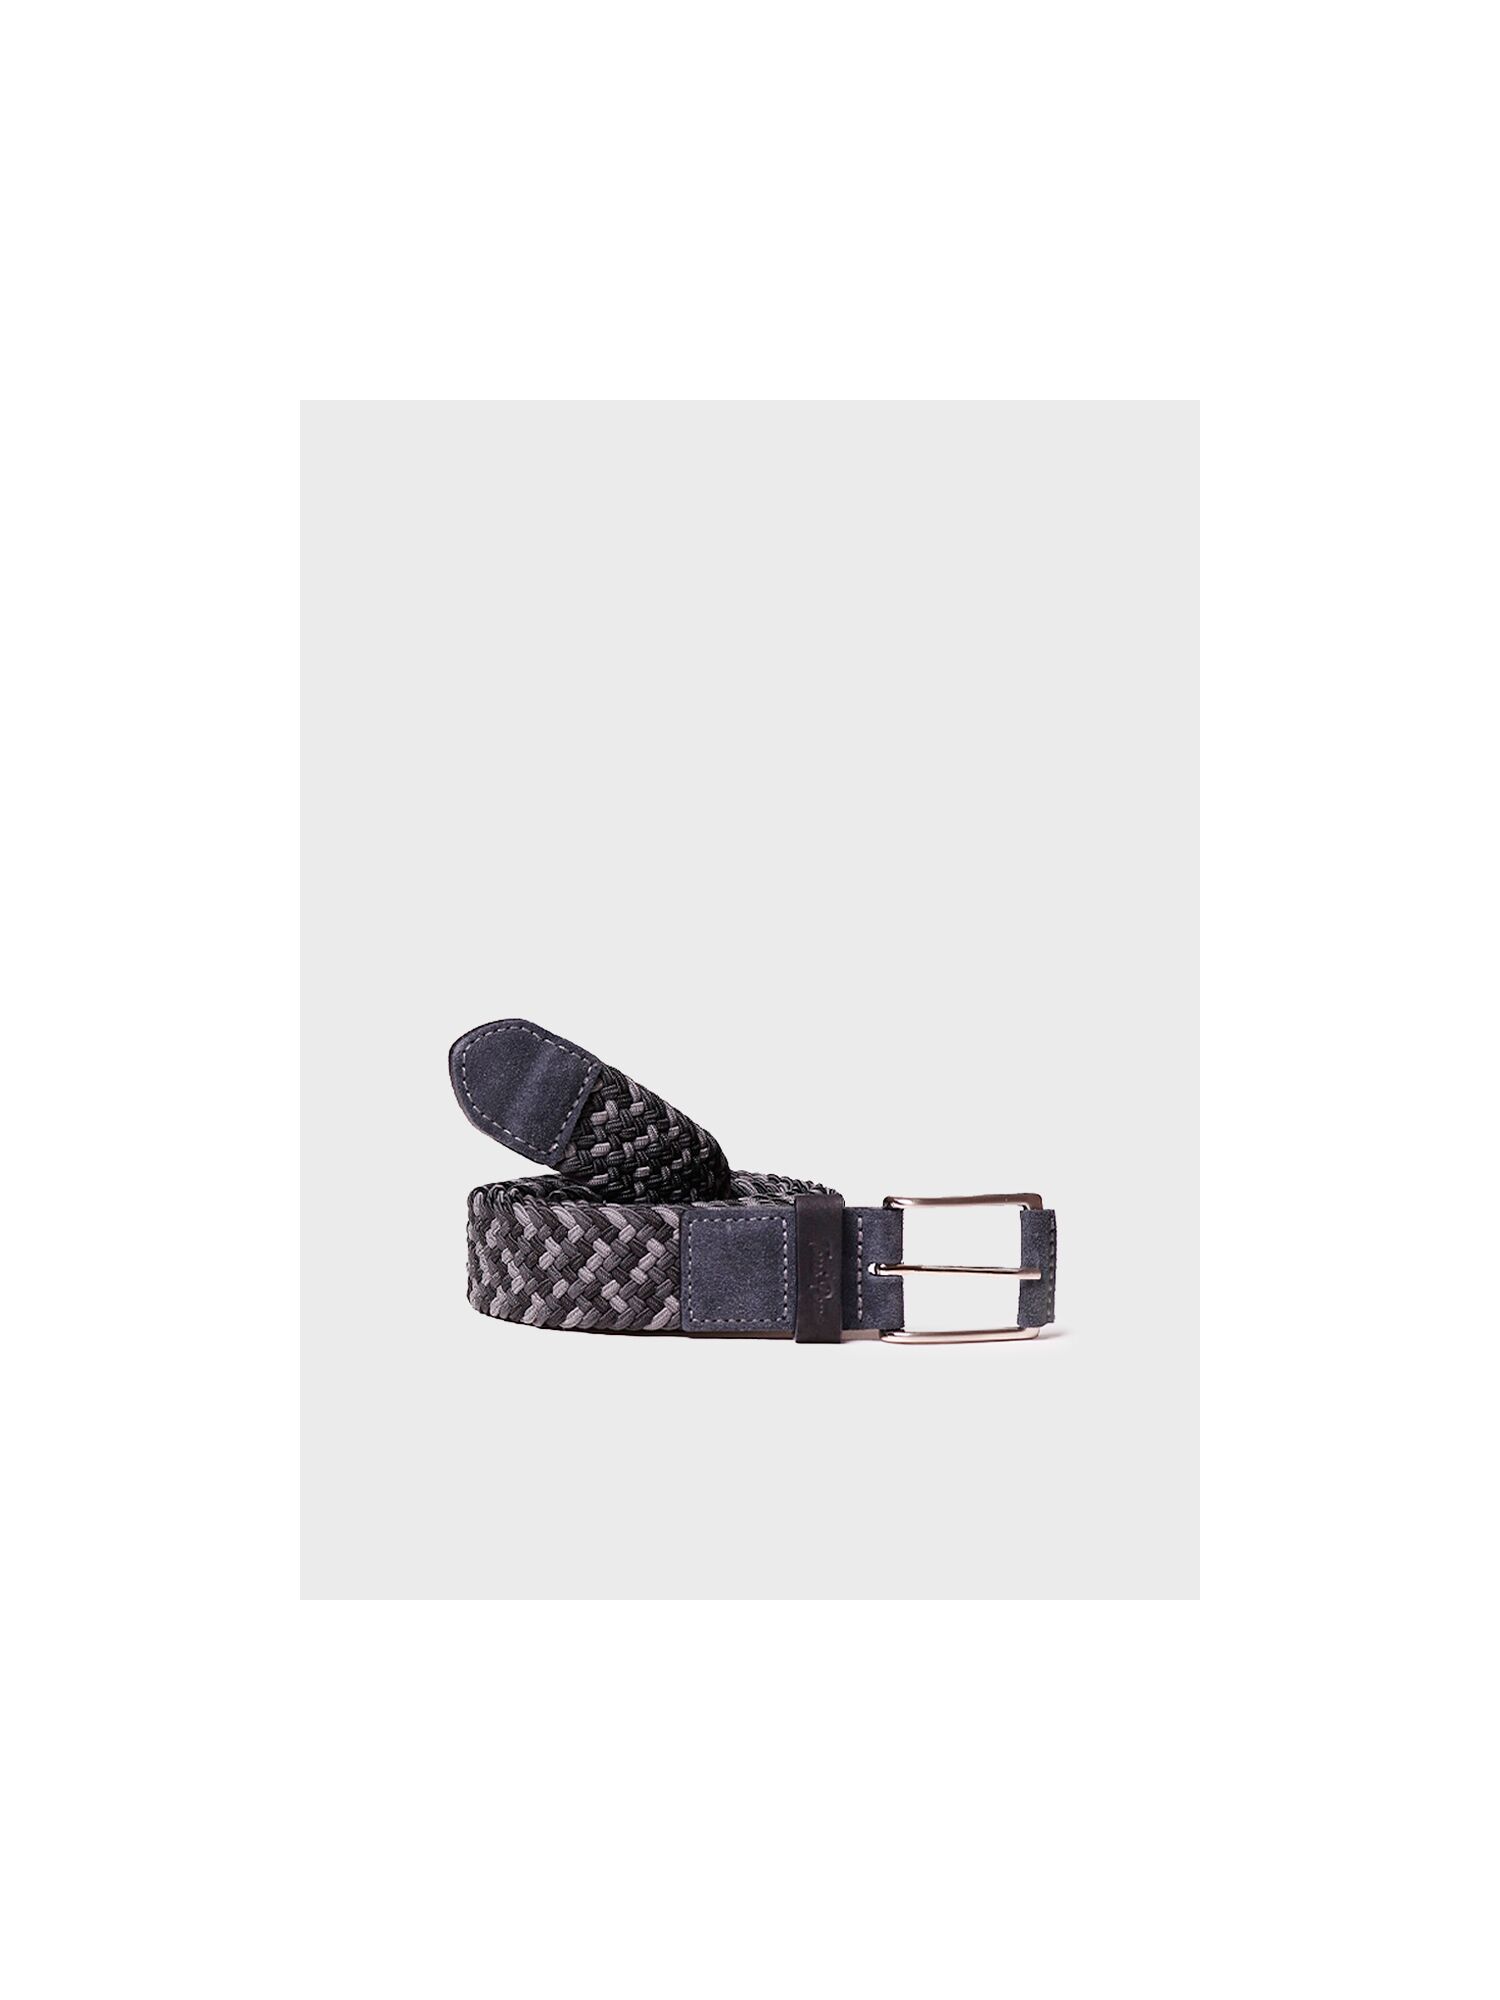 Men's gray fabric and leather belt - ERIC